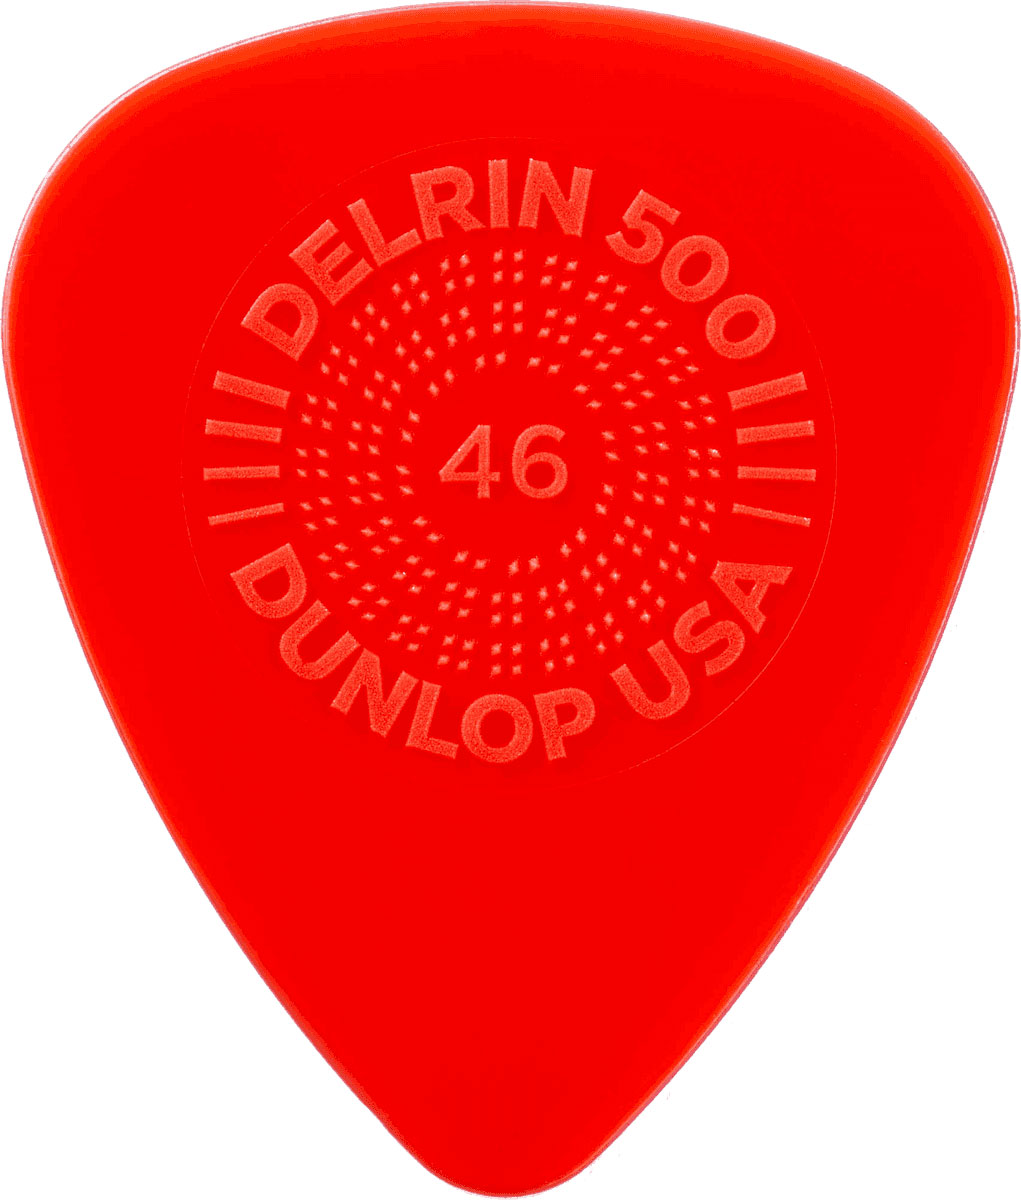 JIM DUNLOP SPECIALTY DELRIN 500 PRIME GRIP 0,46MM X 12